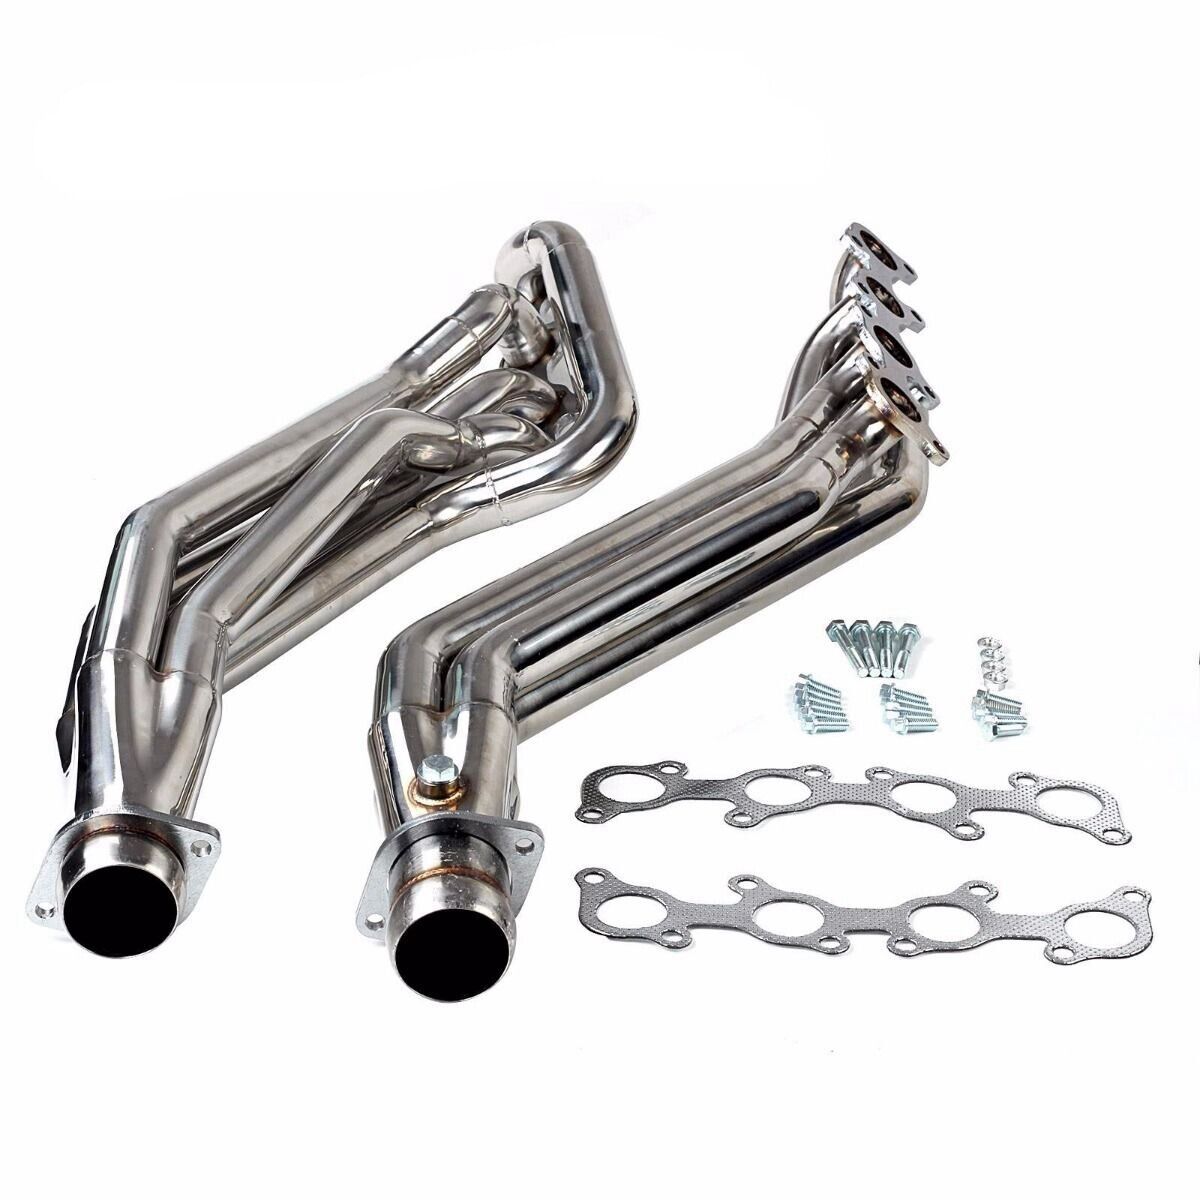 NEW Exhaust Manifold Headers for Ford 2011-2016 MUSTANG GT 5.0/302 V8`